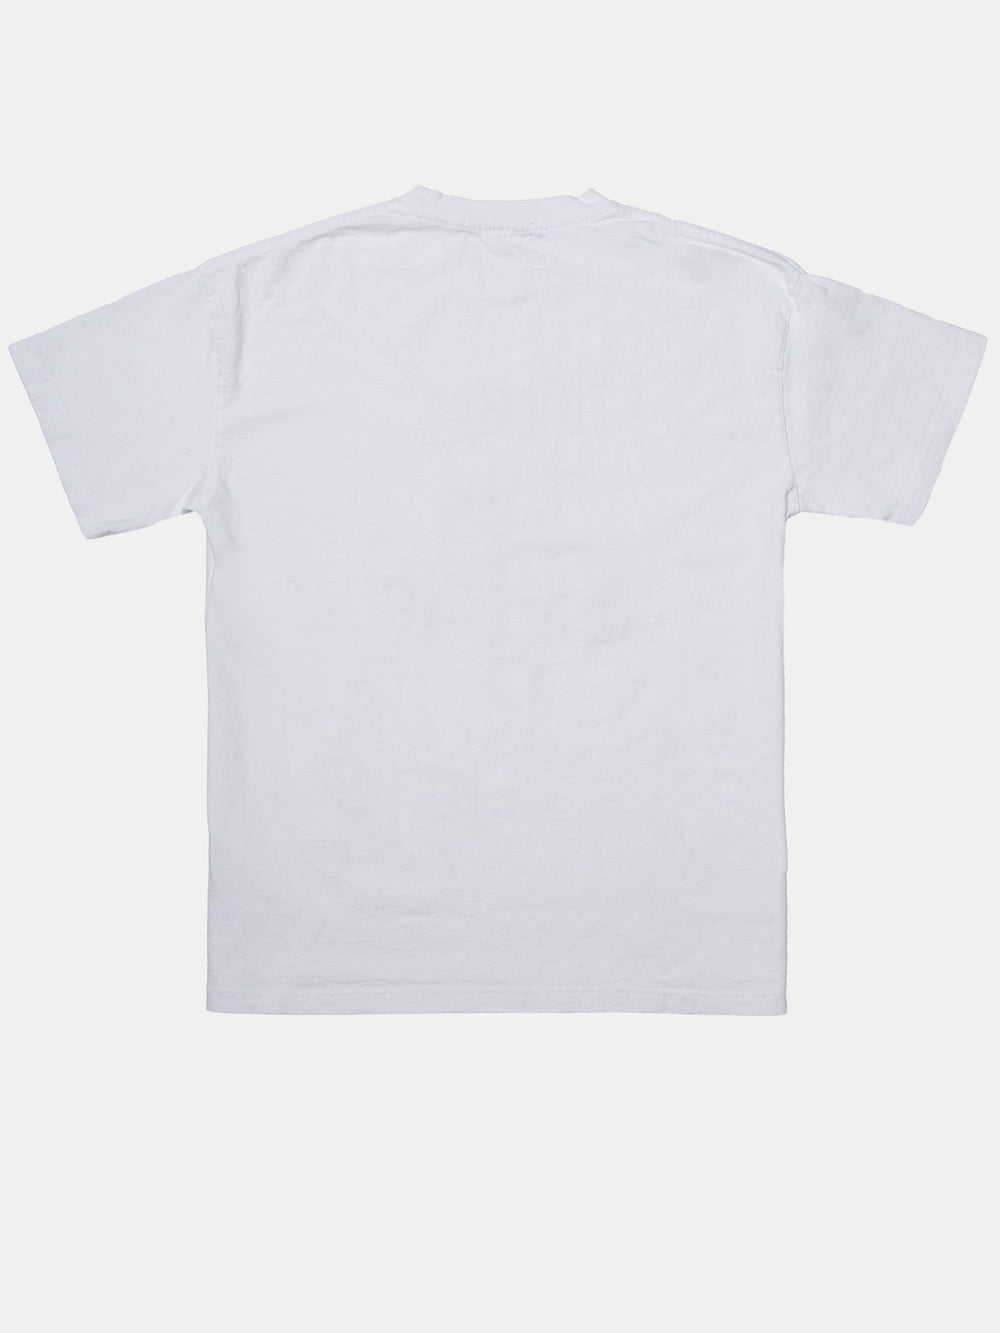 More Than An Athlete Venice Tee White - blank back of shirt